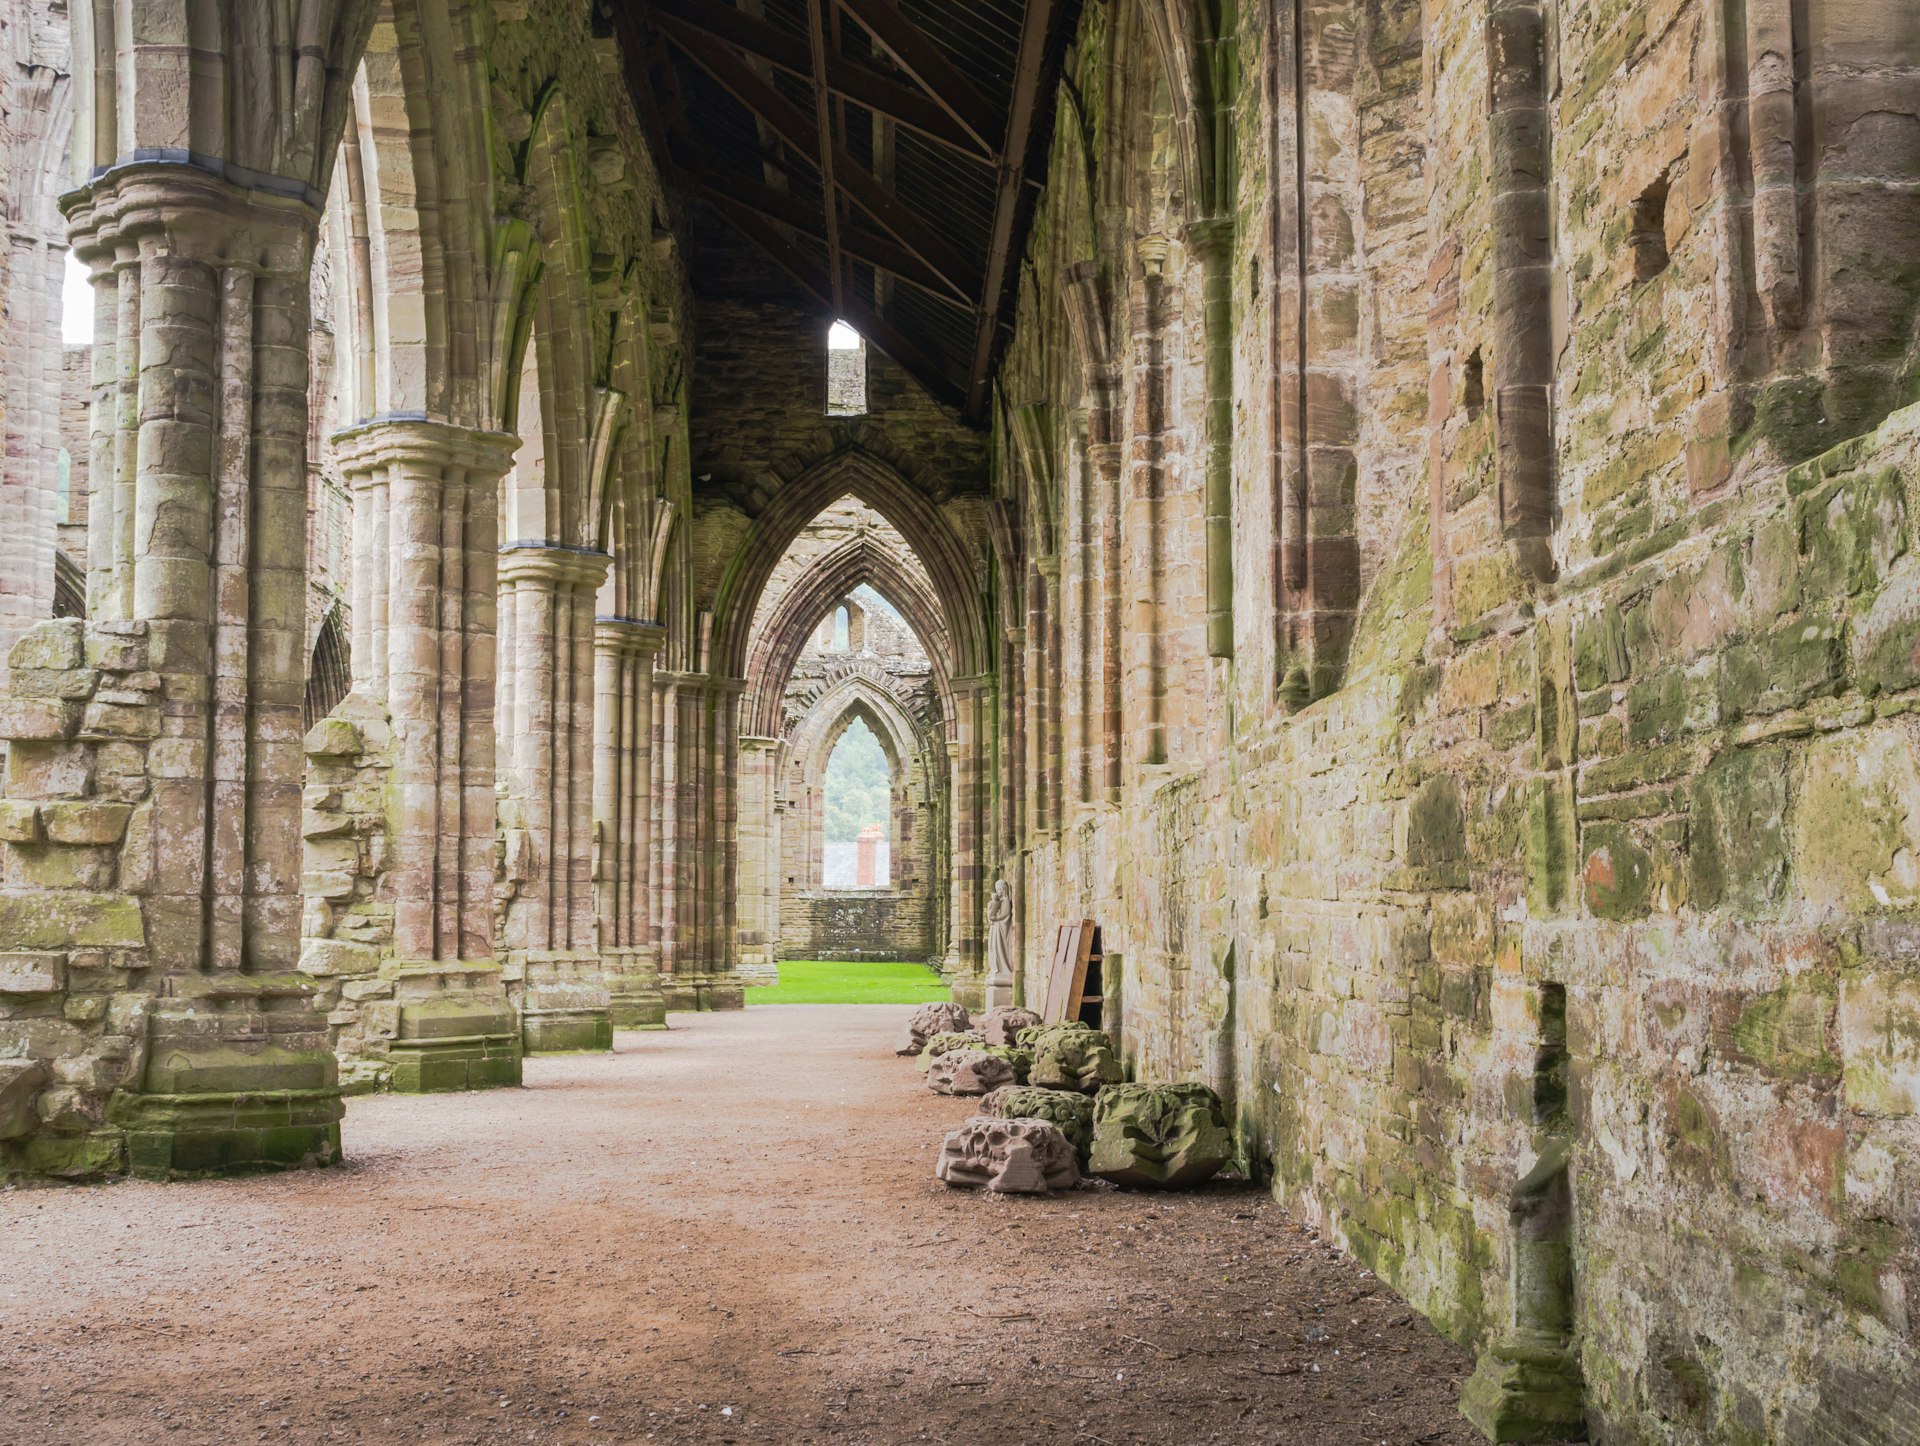 Ruins of Tintern Abbey, a former cistercian church from the 12th century